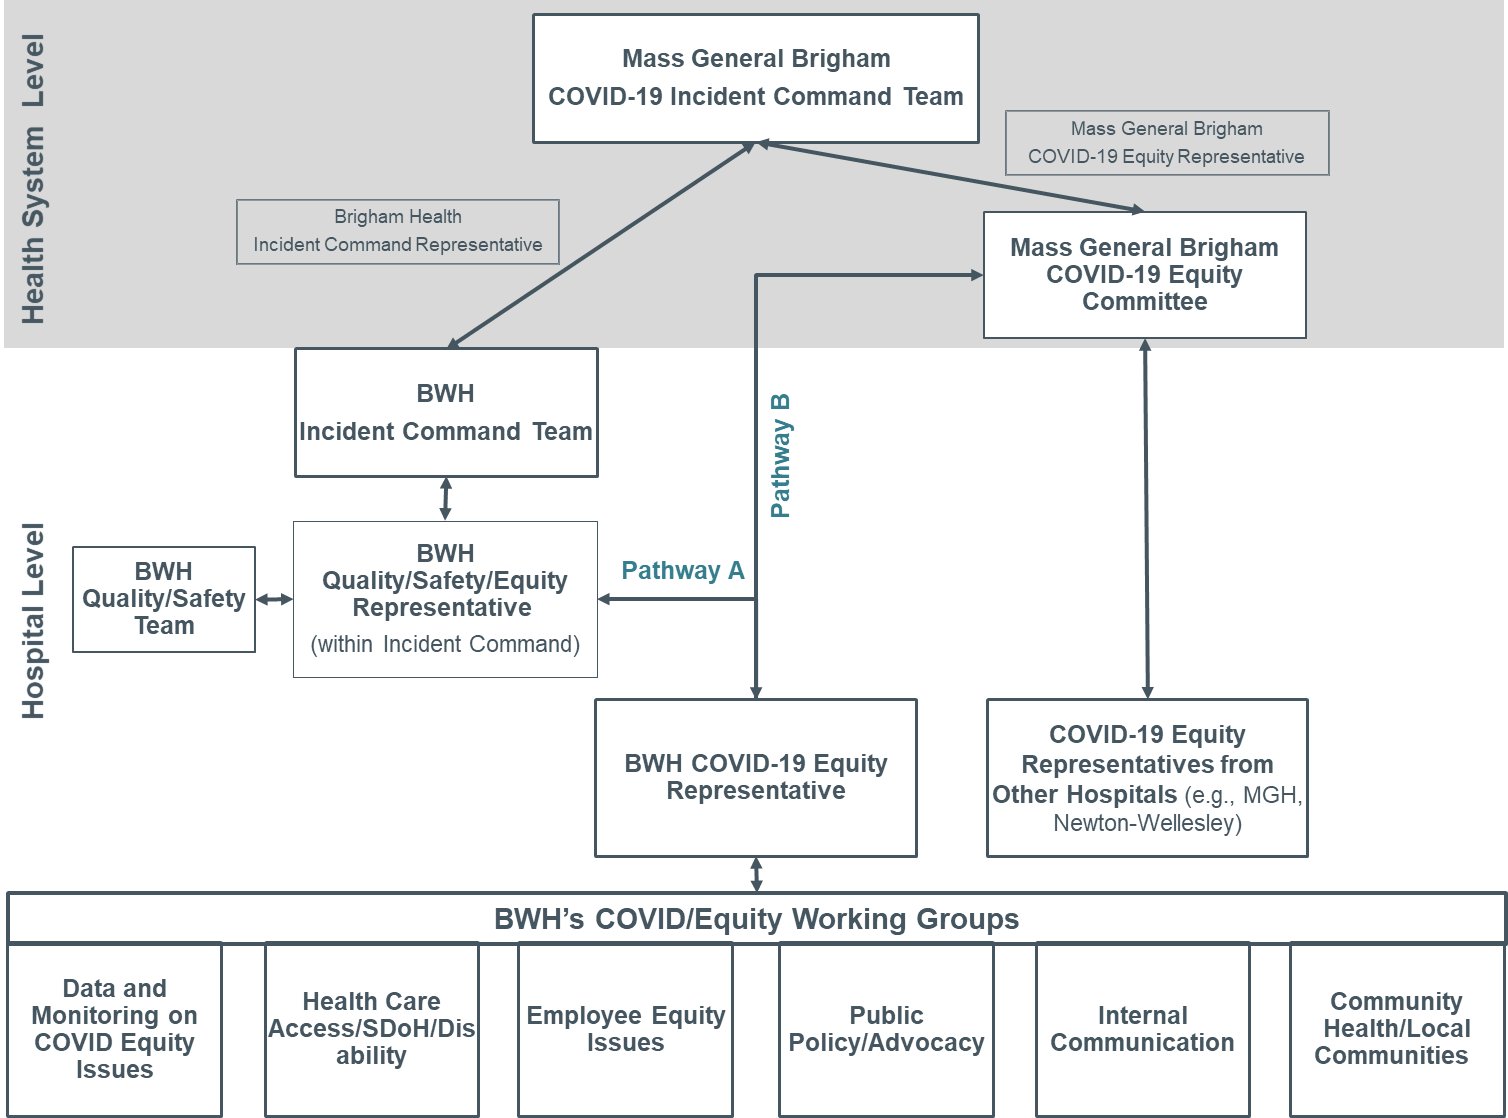 Brigham and Women's Hospital Structure for Integration of Equity into Incident Command Teams